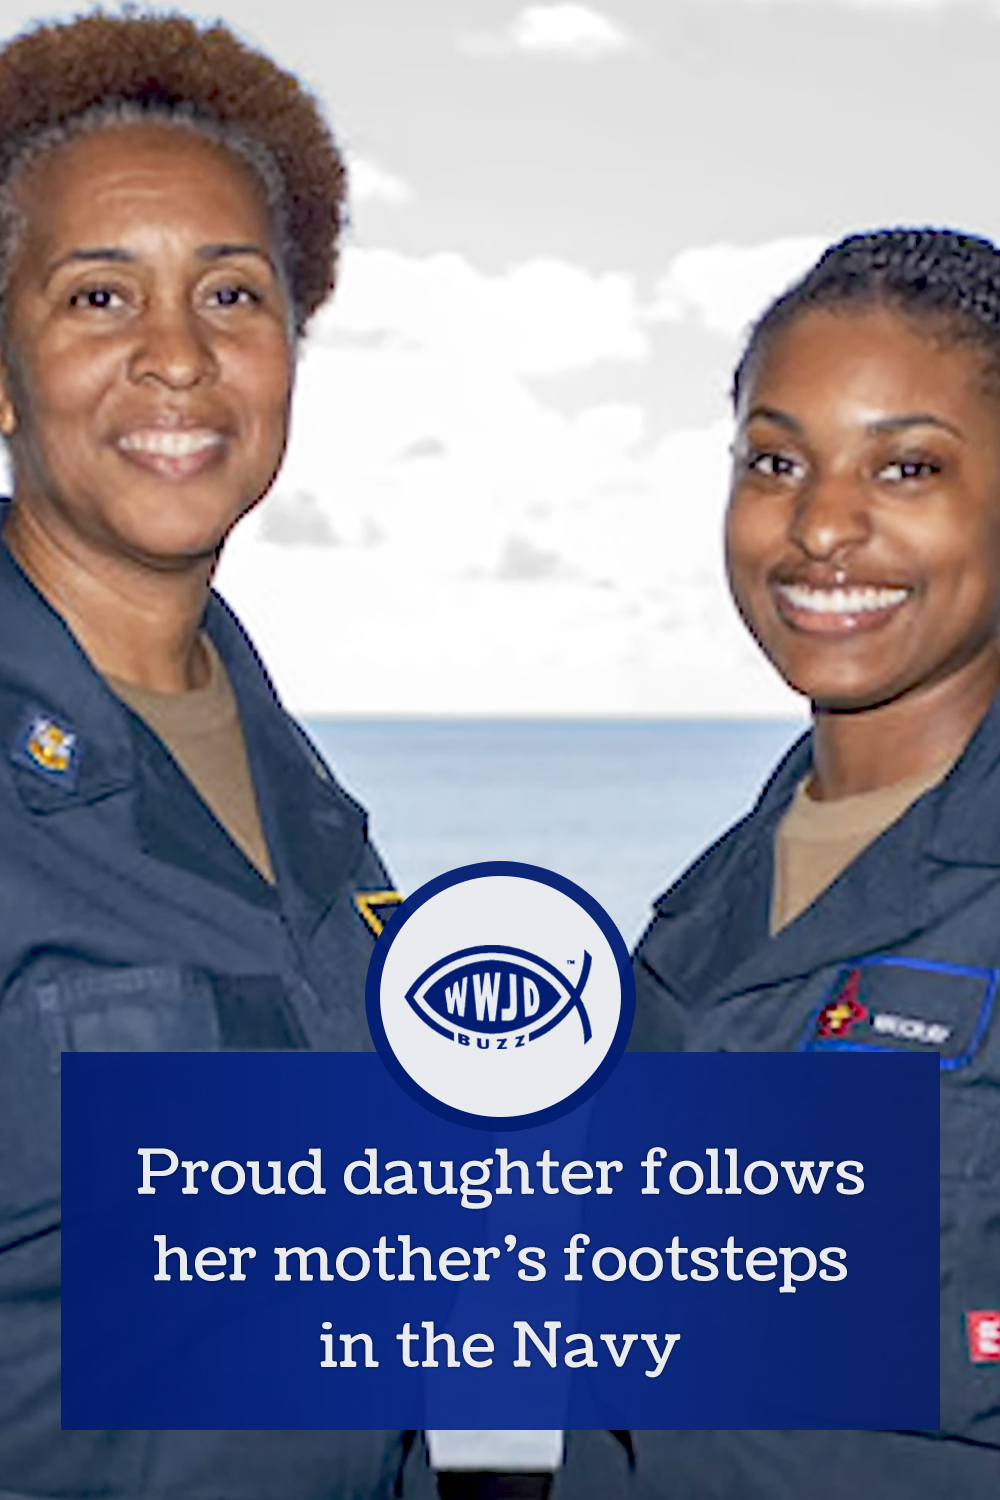 Proud daughter follows her mother’s footsteps in the Navy